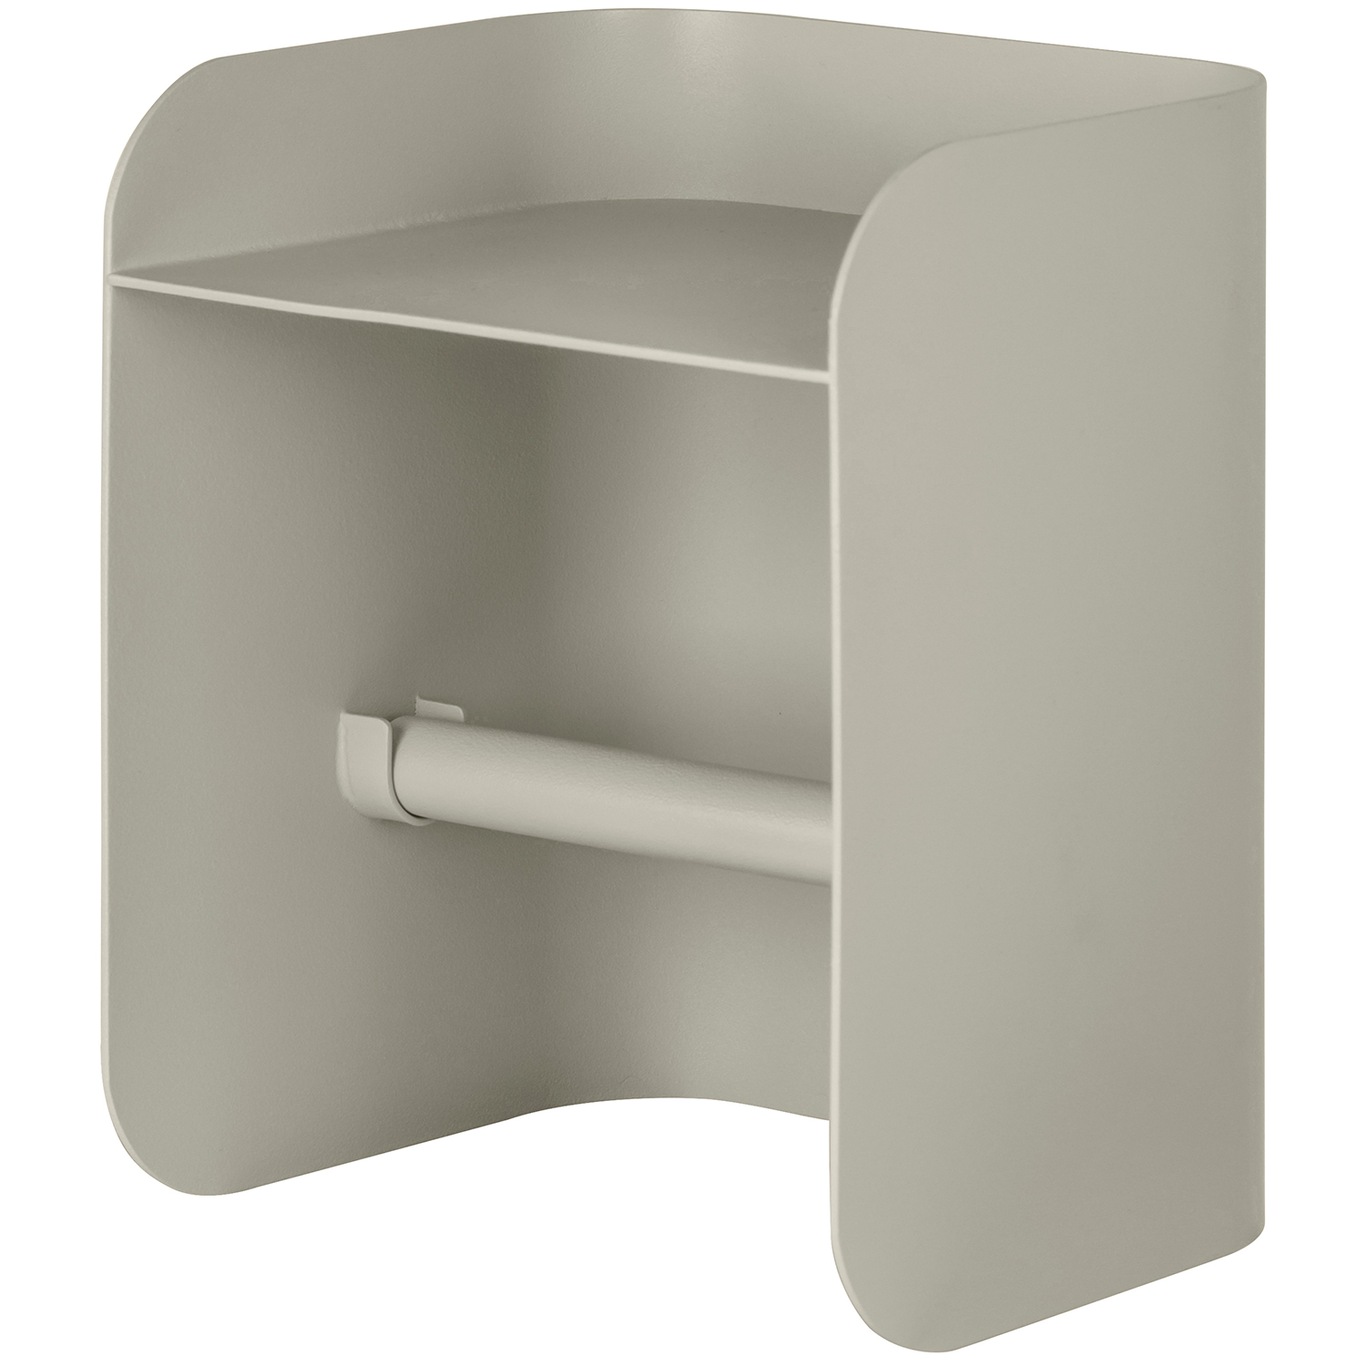 Carry Toilet Roll Holder, Sand Grey